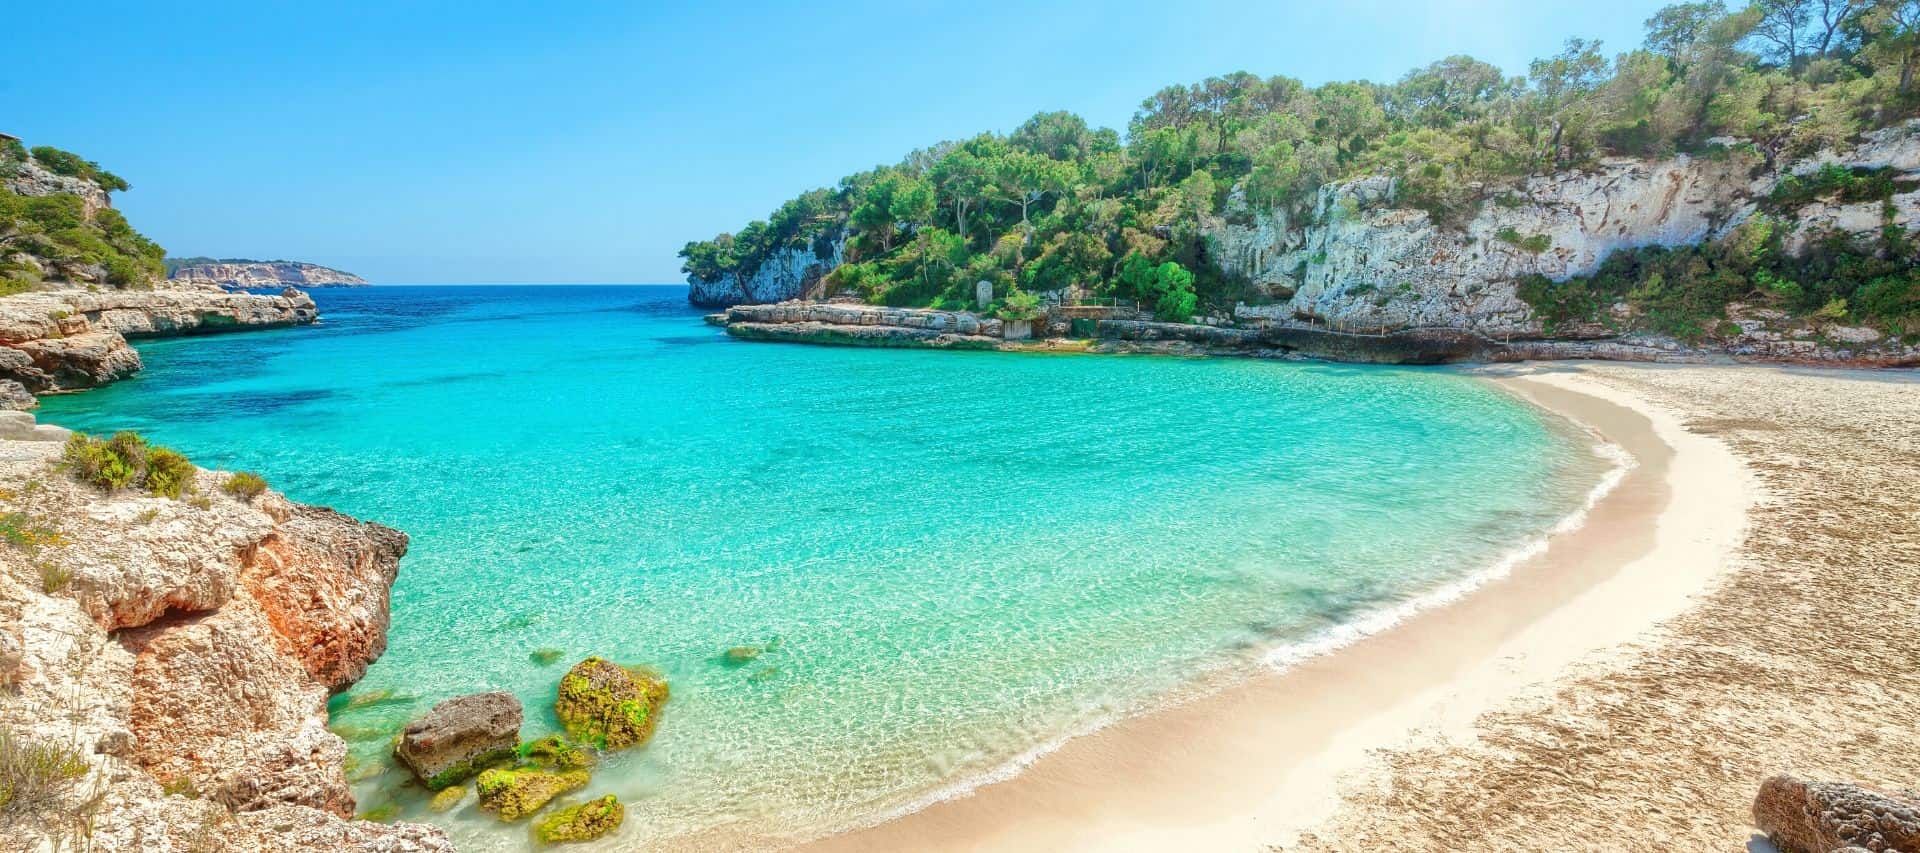 Our Top 10 Places to Stay in Majorca